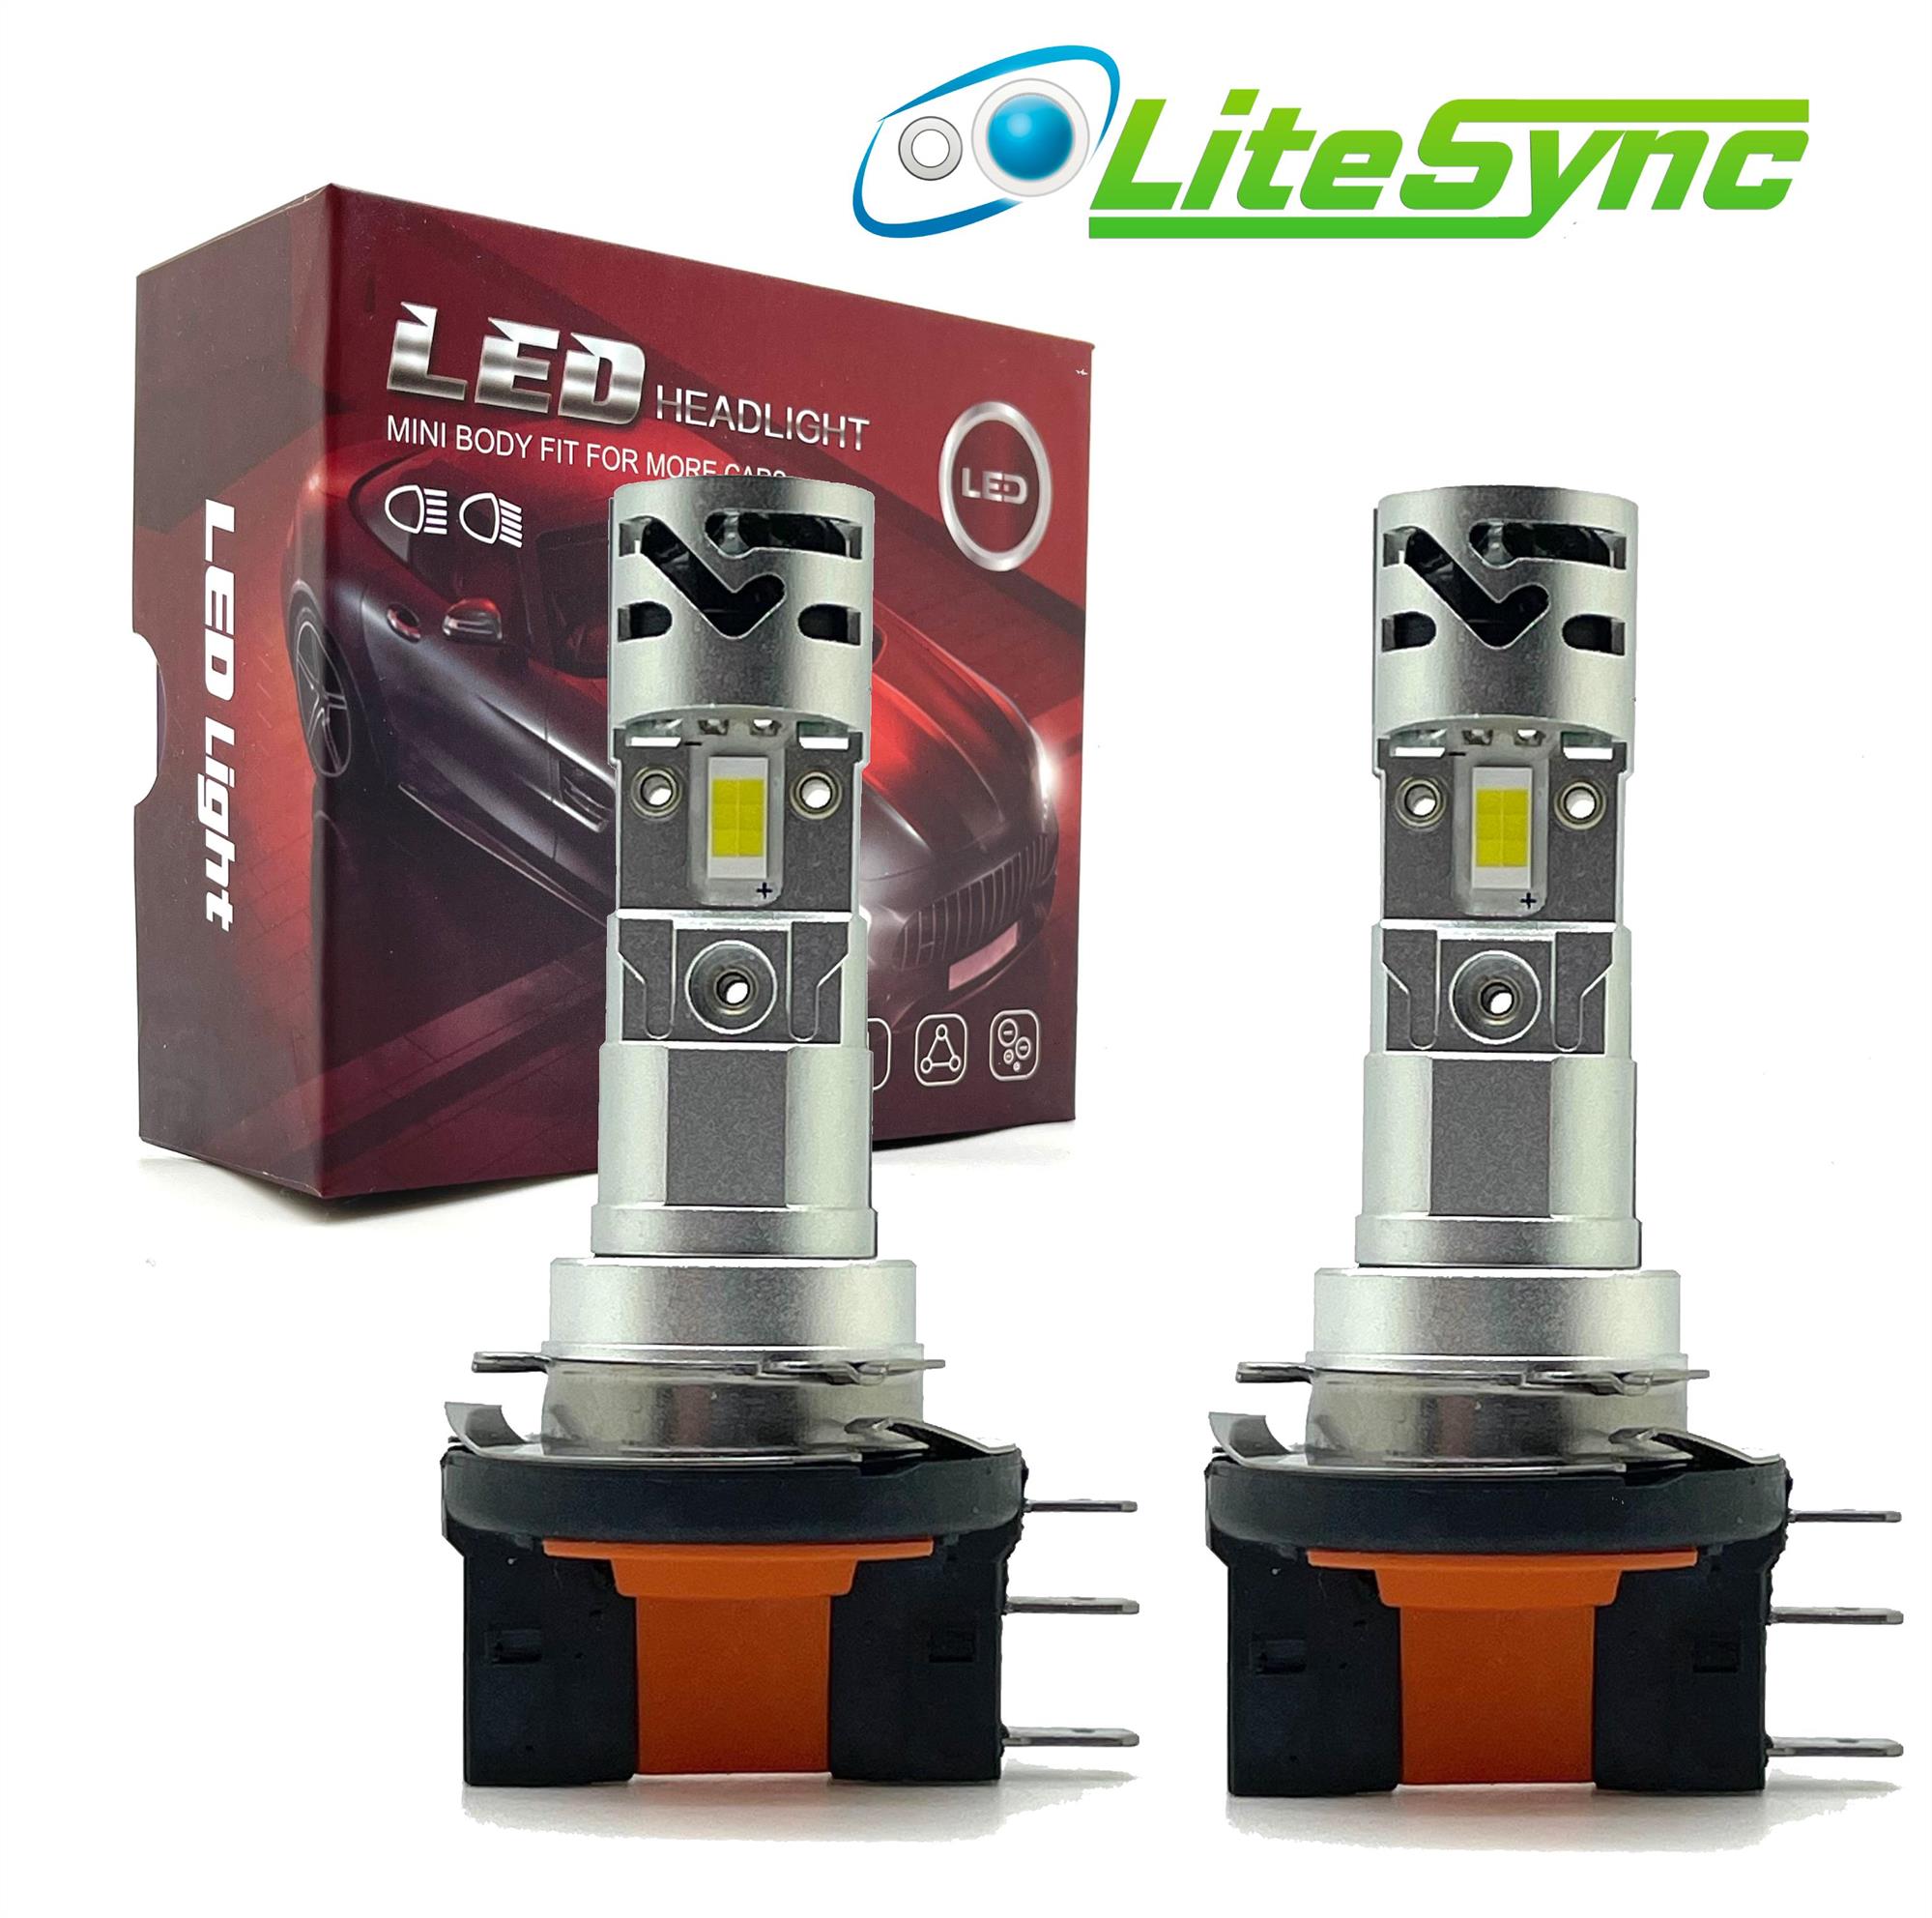 Bmw 7451h7 Led Headlight Bulbs 20000lm 100w Canbus Error-free For